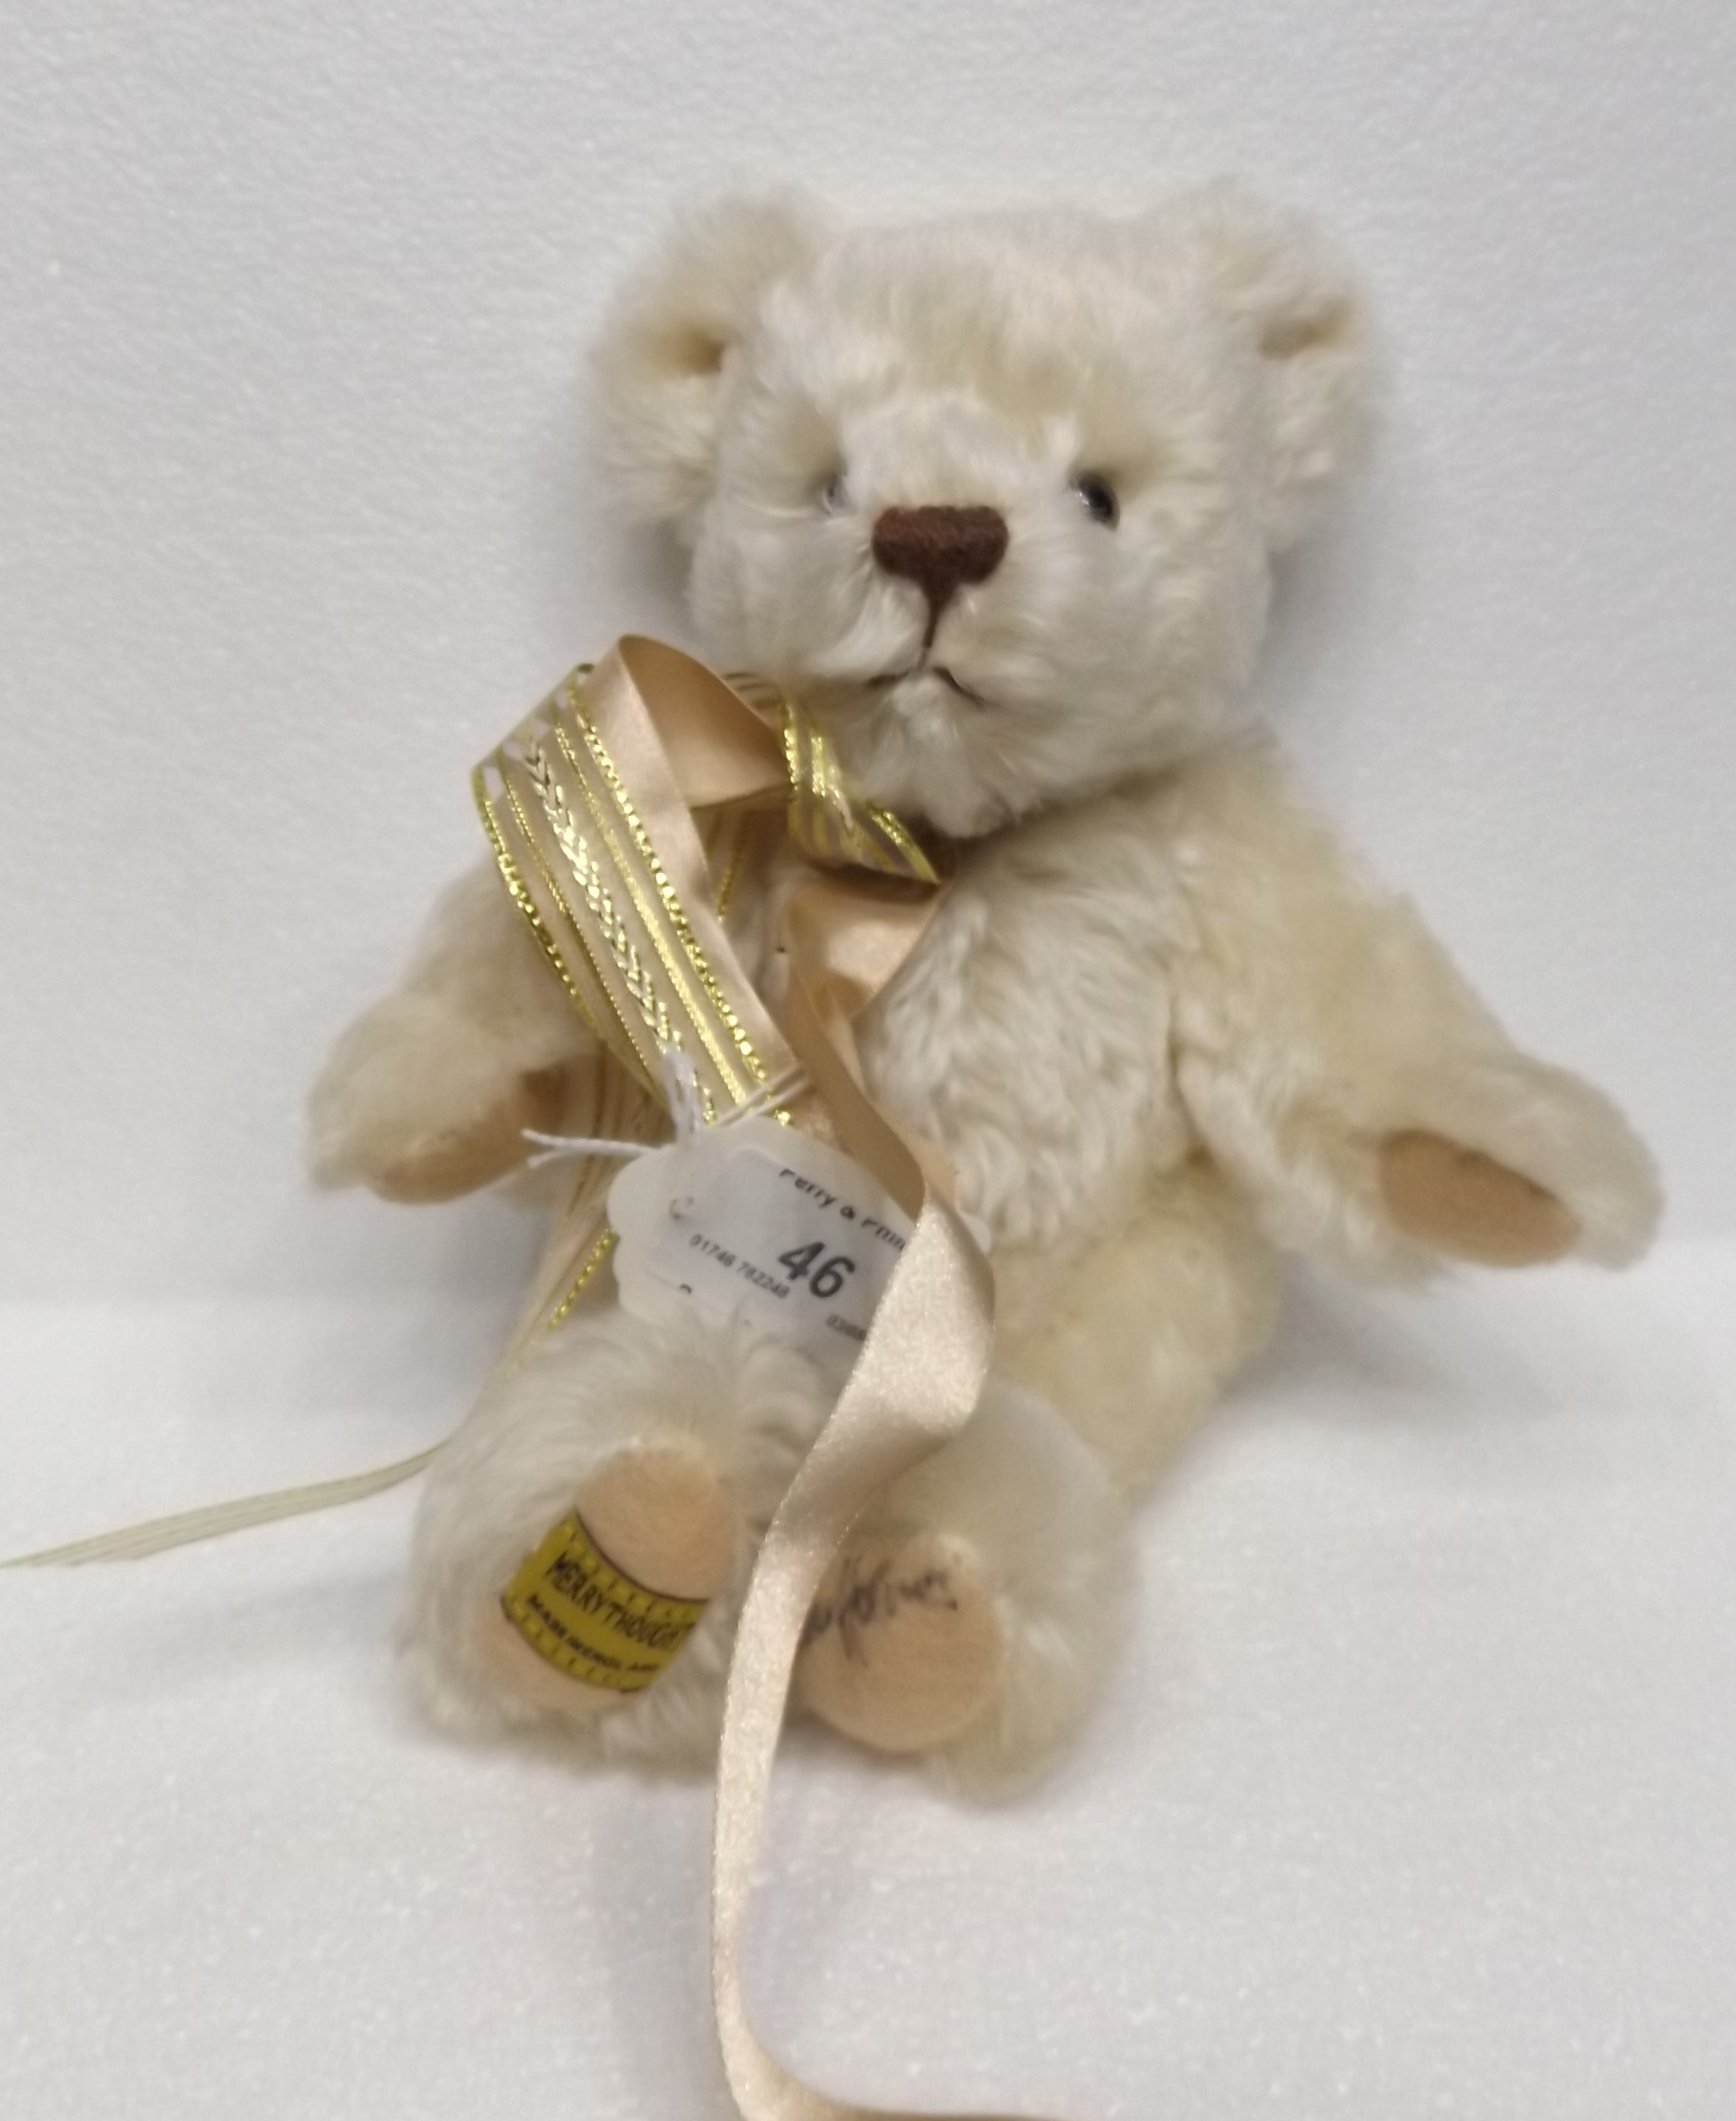 (2 Merrythought Limited Edition Teddy Bear Number 19 of only 20 produced